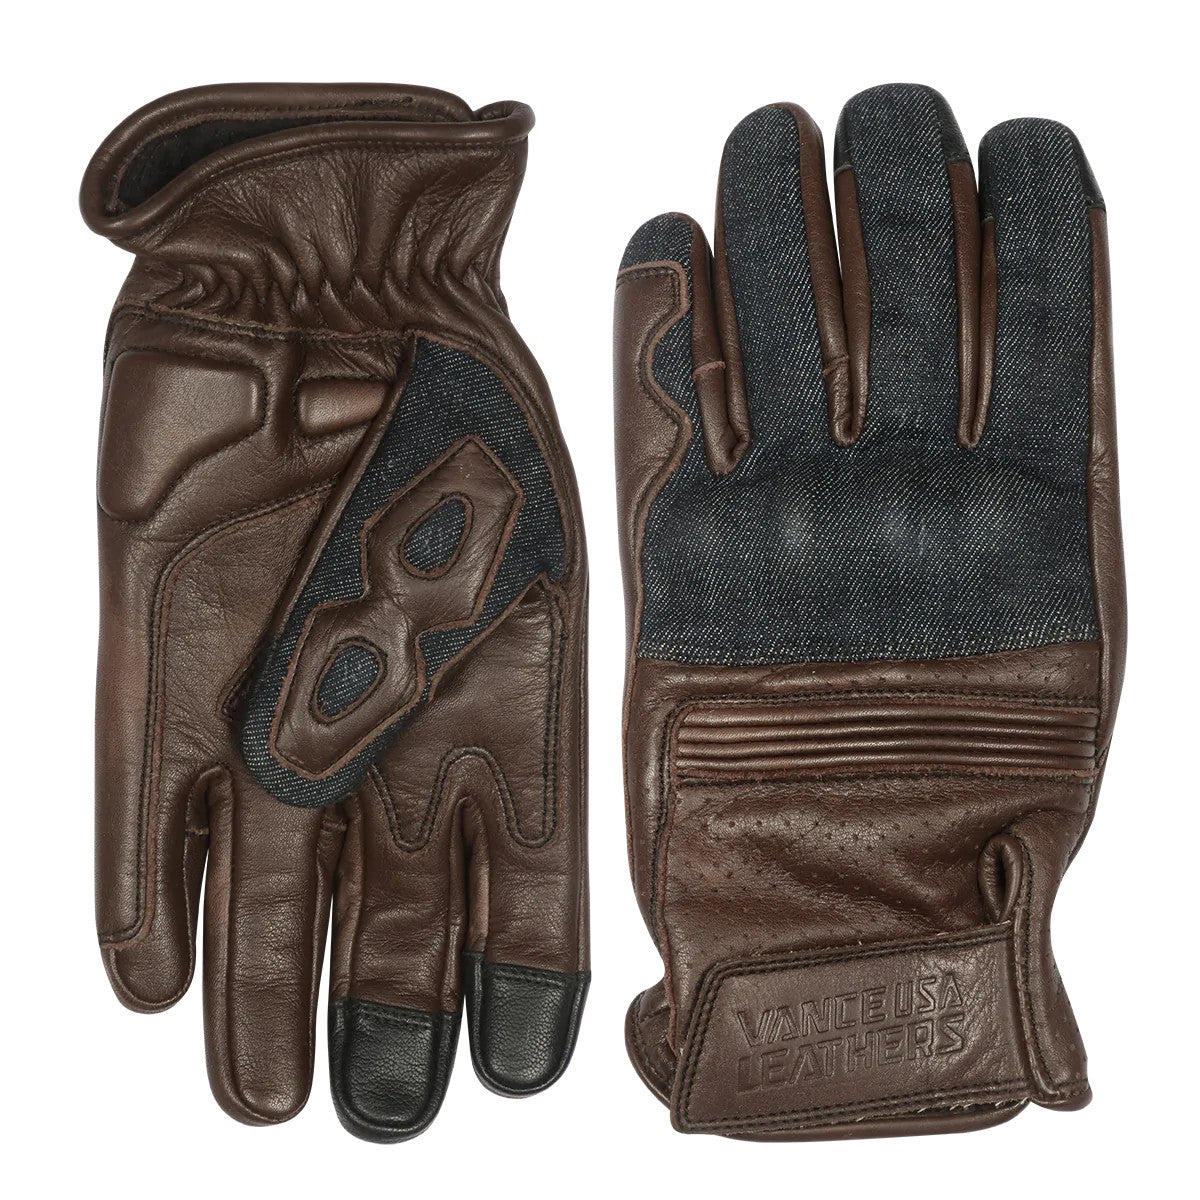 Vance Denim & Leather Gloves with Mobile Phone Touchscreen